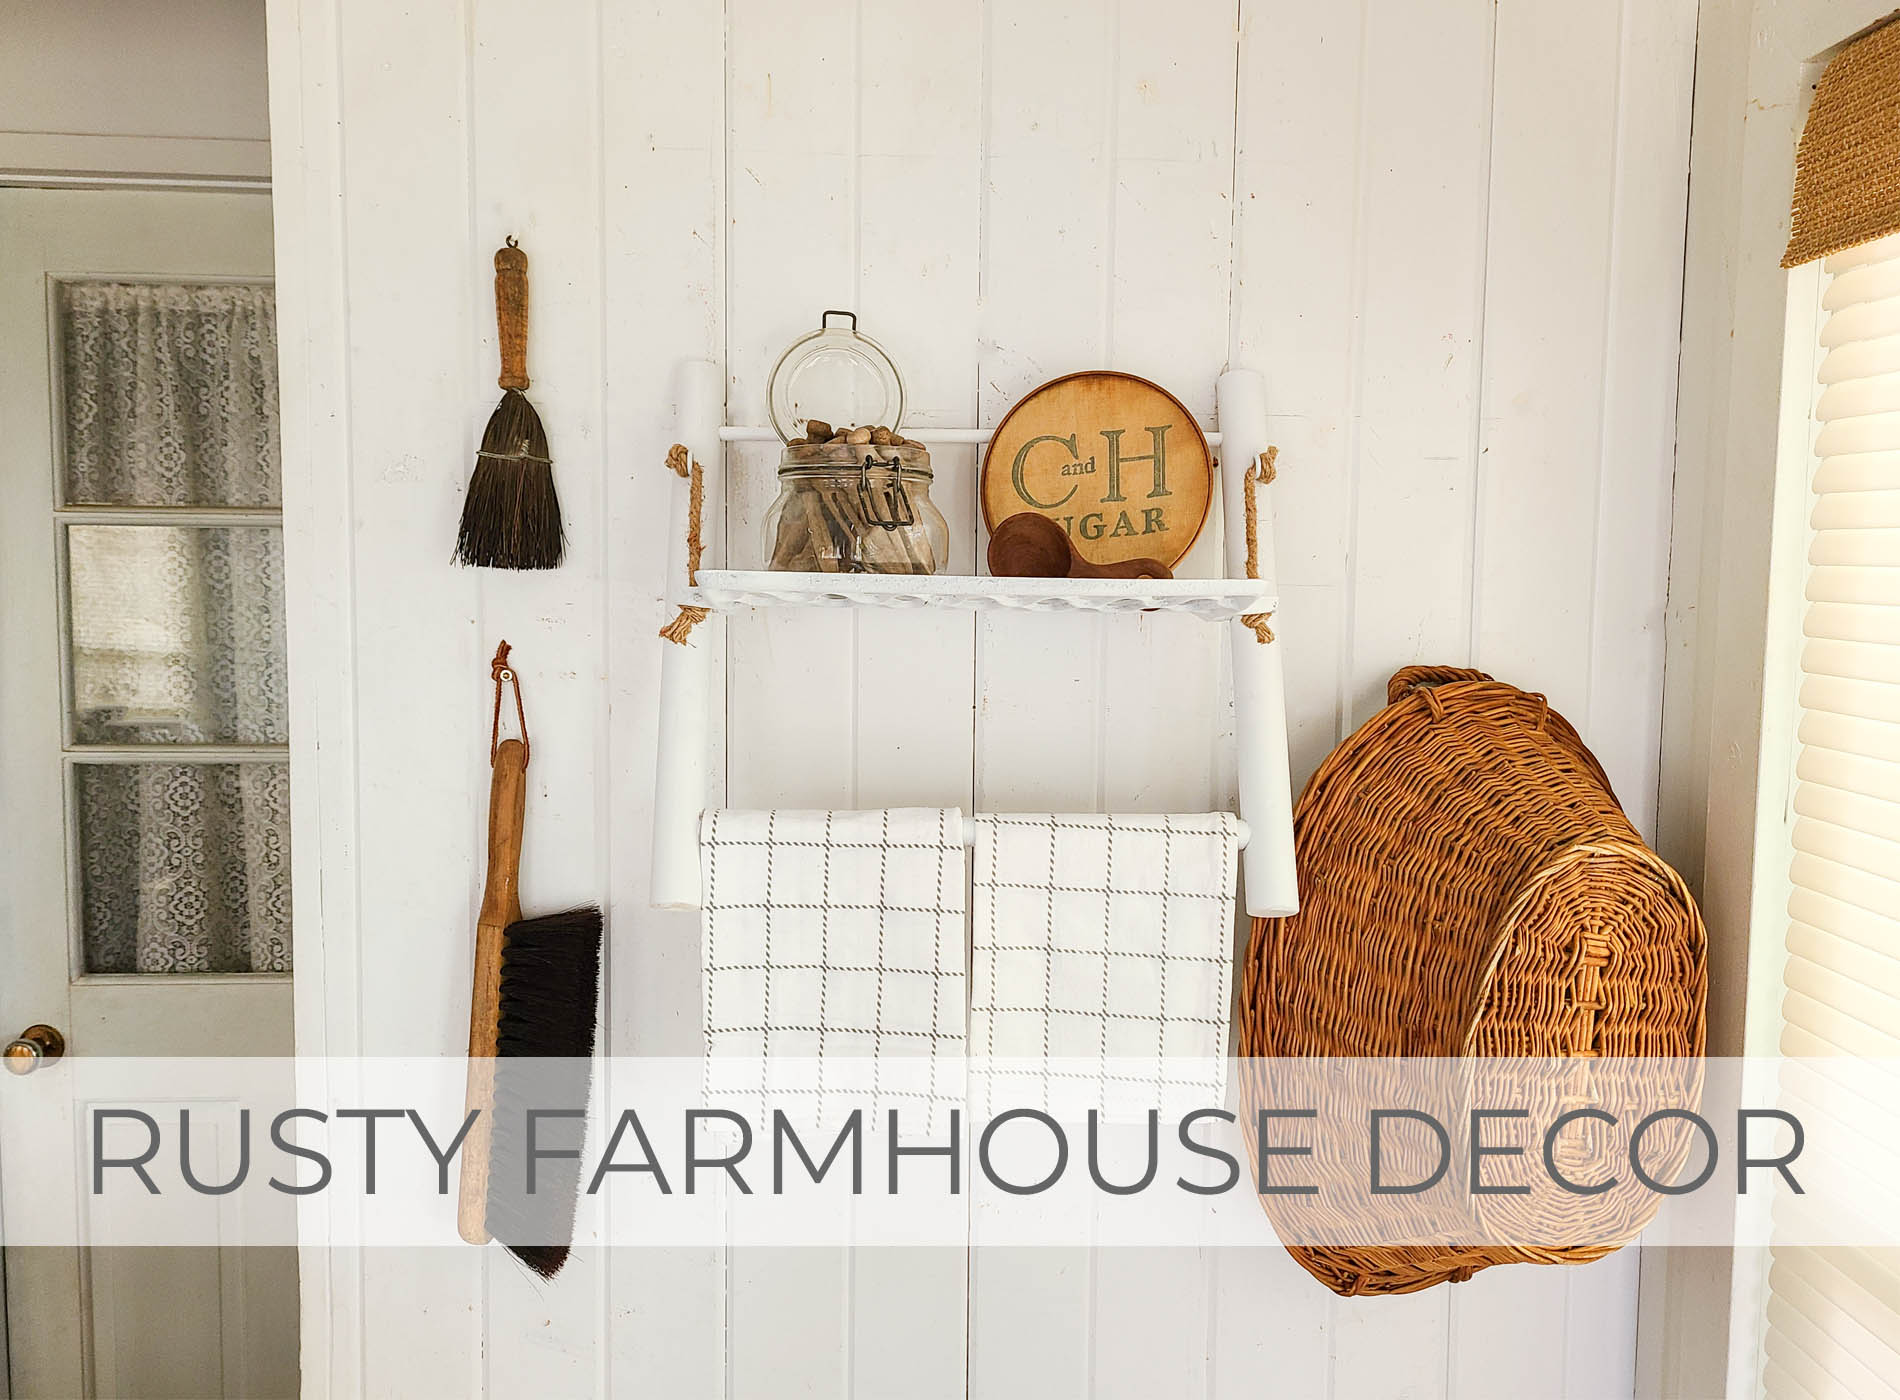 Showcase of Rusty Farmhouse Decor from Upcycled Singer Sewing Machine by Larissa of Prodigal Pieces | prodigalpieces.com #prodigalpieces